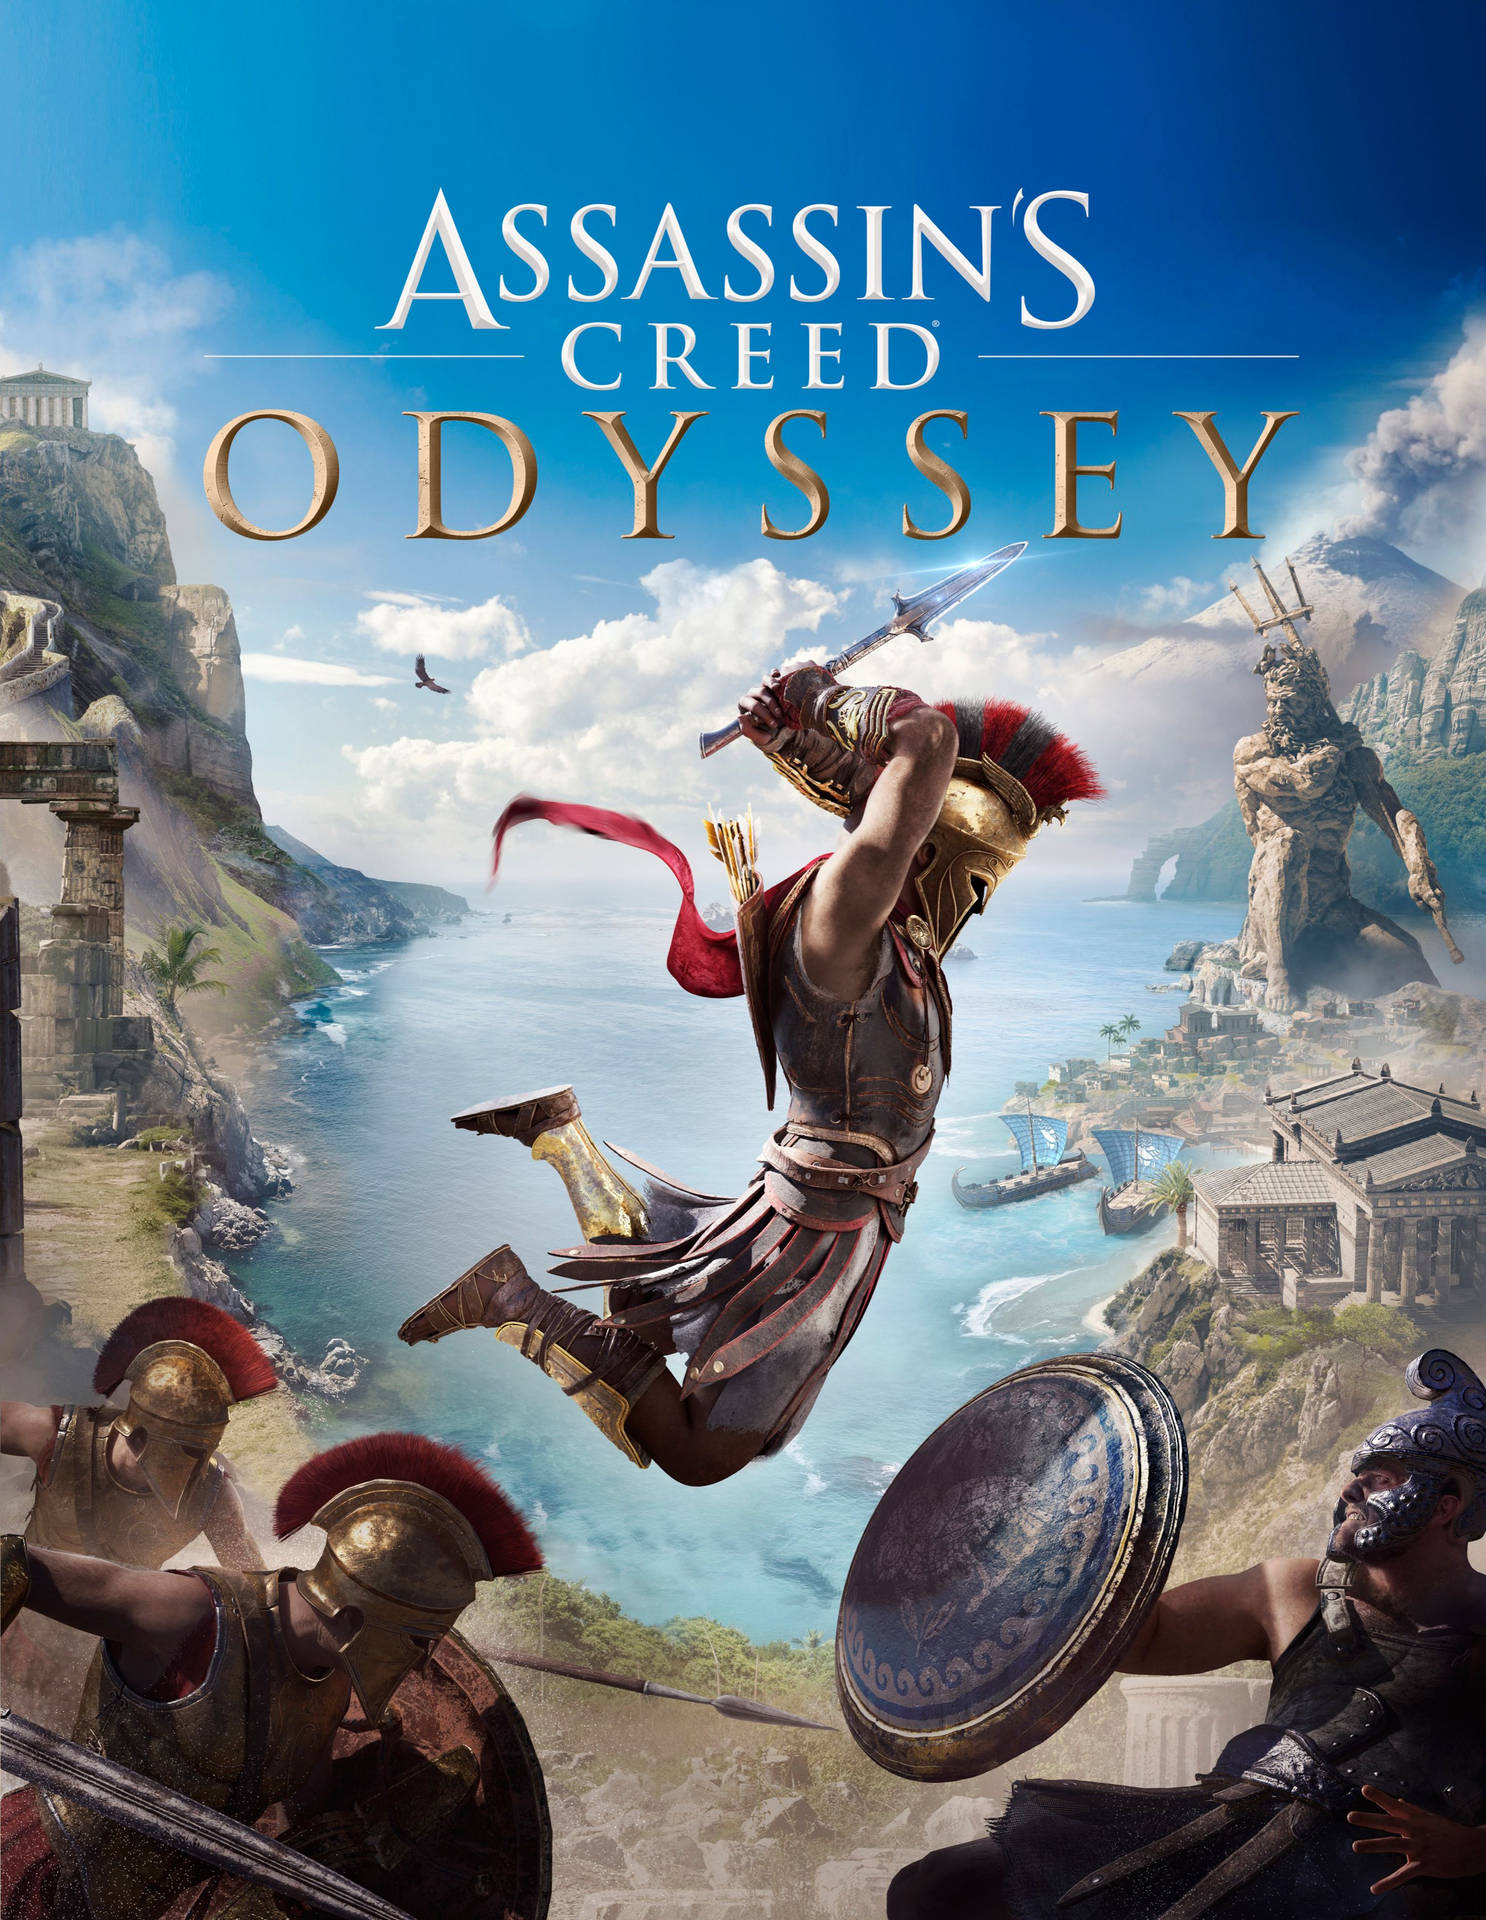 100+] Assassin's Creed Odyssey Wallpapers 